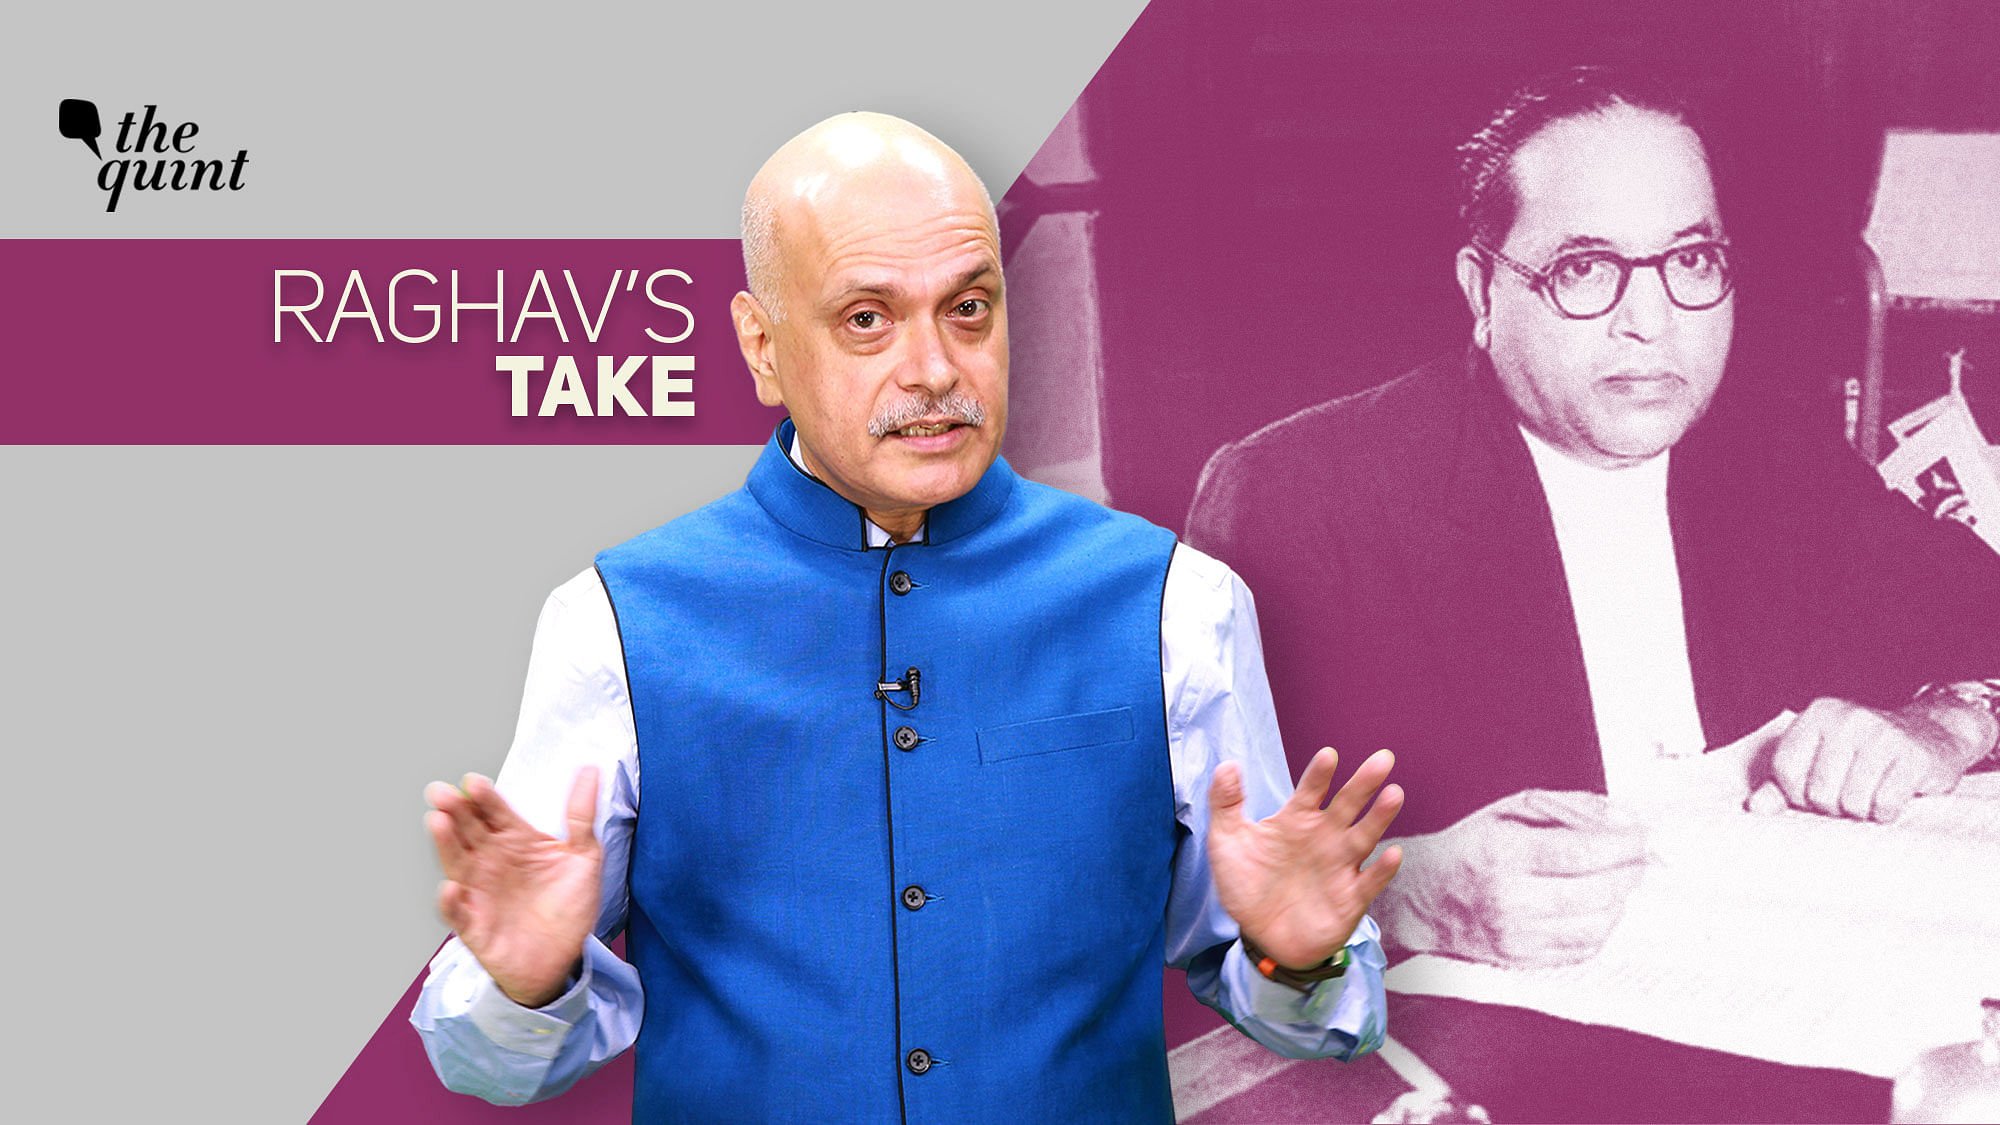 Image of Raghav Bahl, Founder-Editor, The Quint, and Dr BR Ambedkar, used for representational purposes.